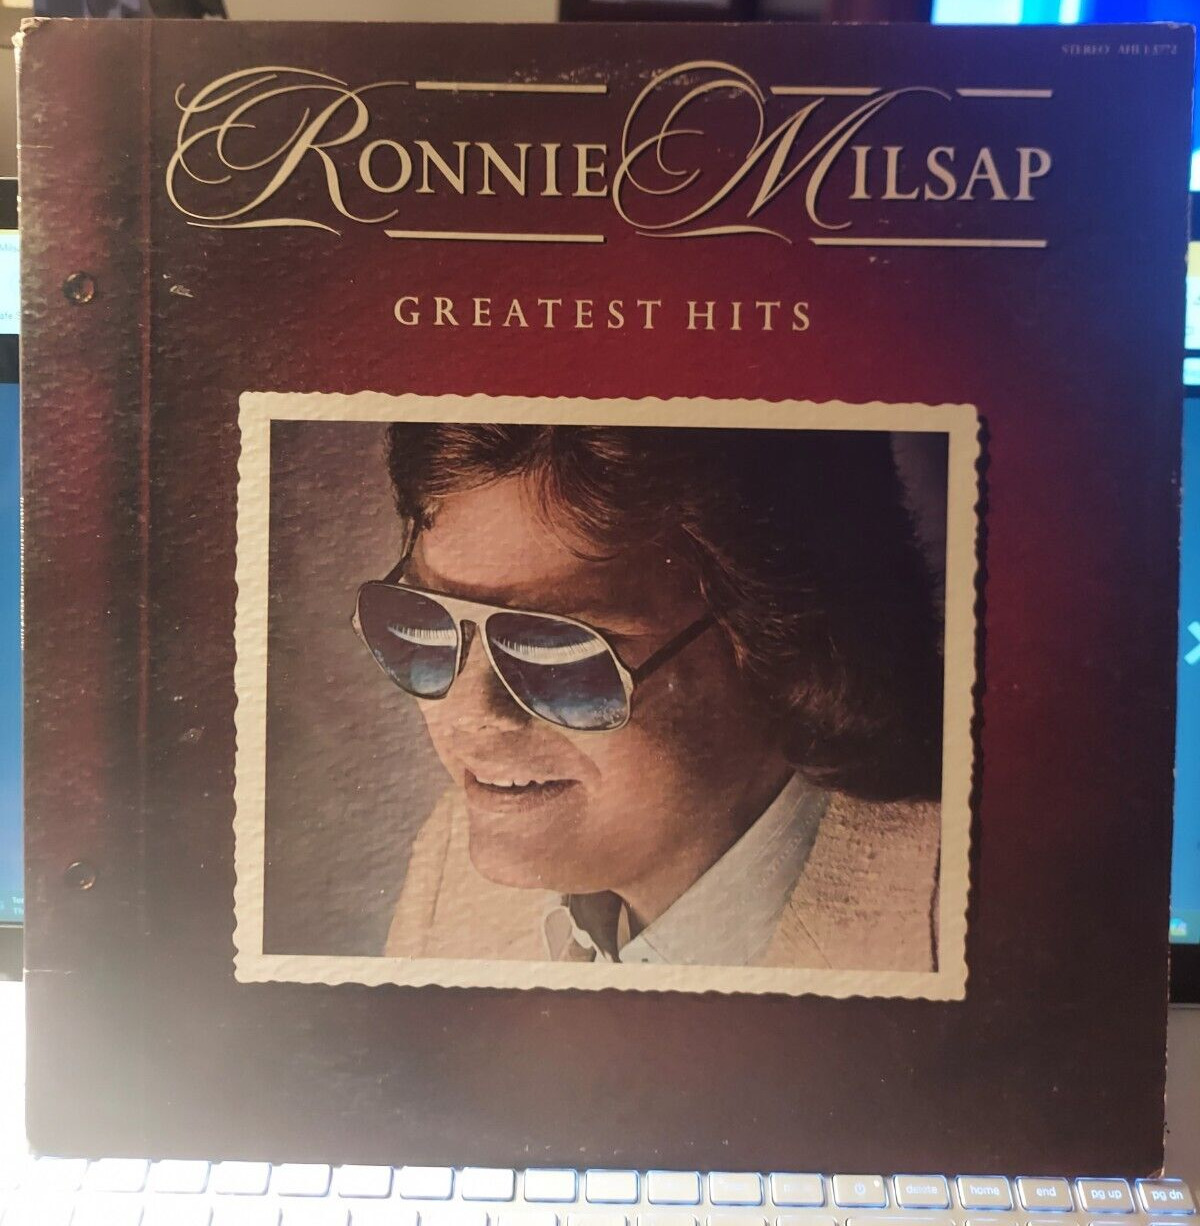 Ronnie Milsap - Greatest Hits LP  RCA Records, AAL1-3772 - Country - VG++/VG+